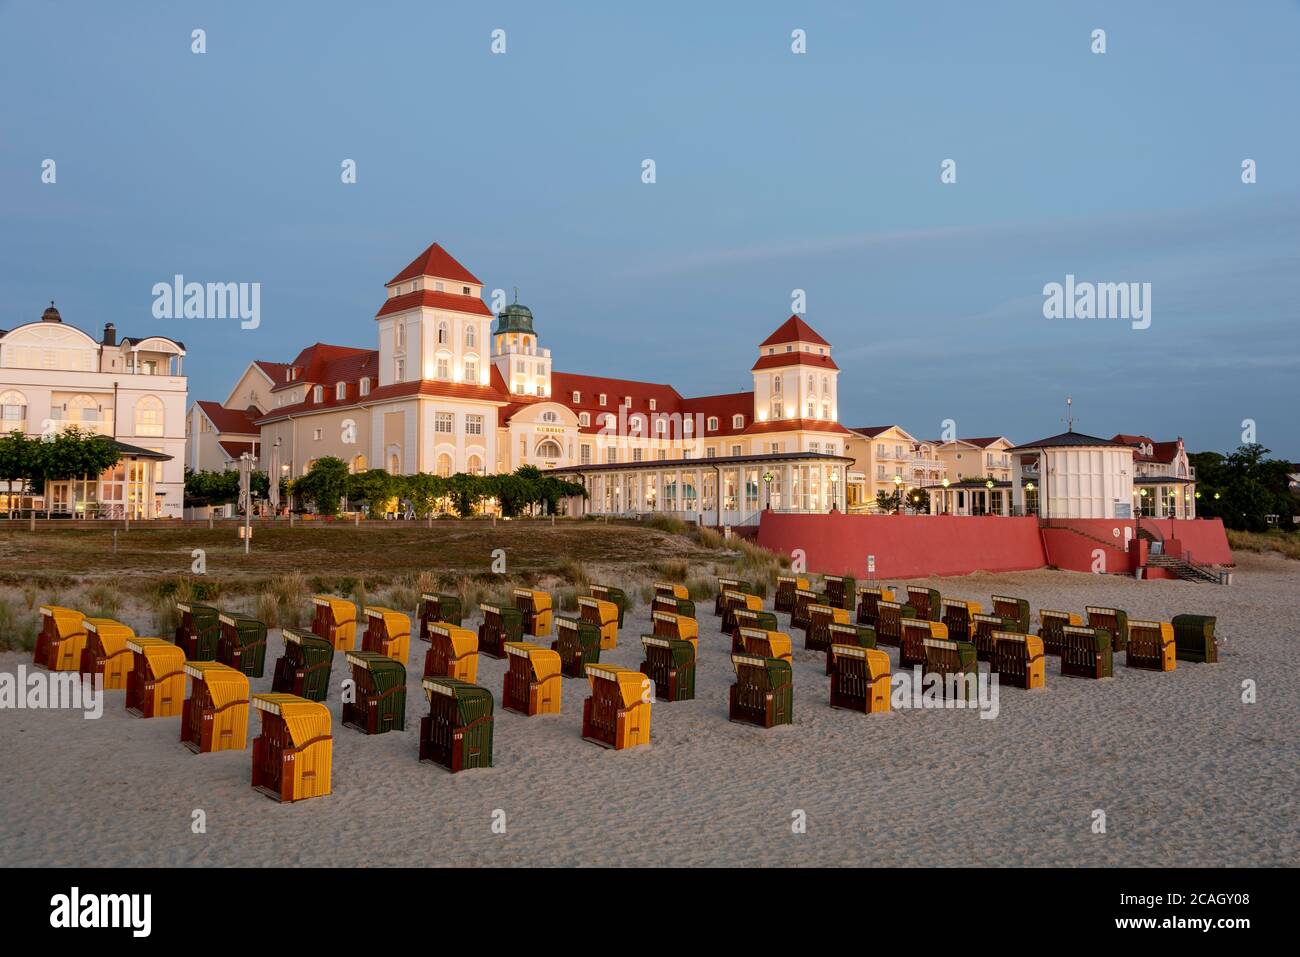 05 August 2020, Mecklenburg-Western Pomerania, Binz: Yellow and green beach chairs stand in front of the spa hotel of the largest seaside resort on the island of Rügen. Photo: Stephan Schulz/dpa-Zentralbild/ZB Stock Photo